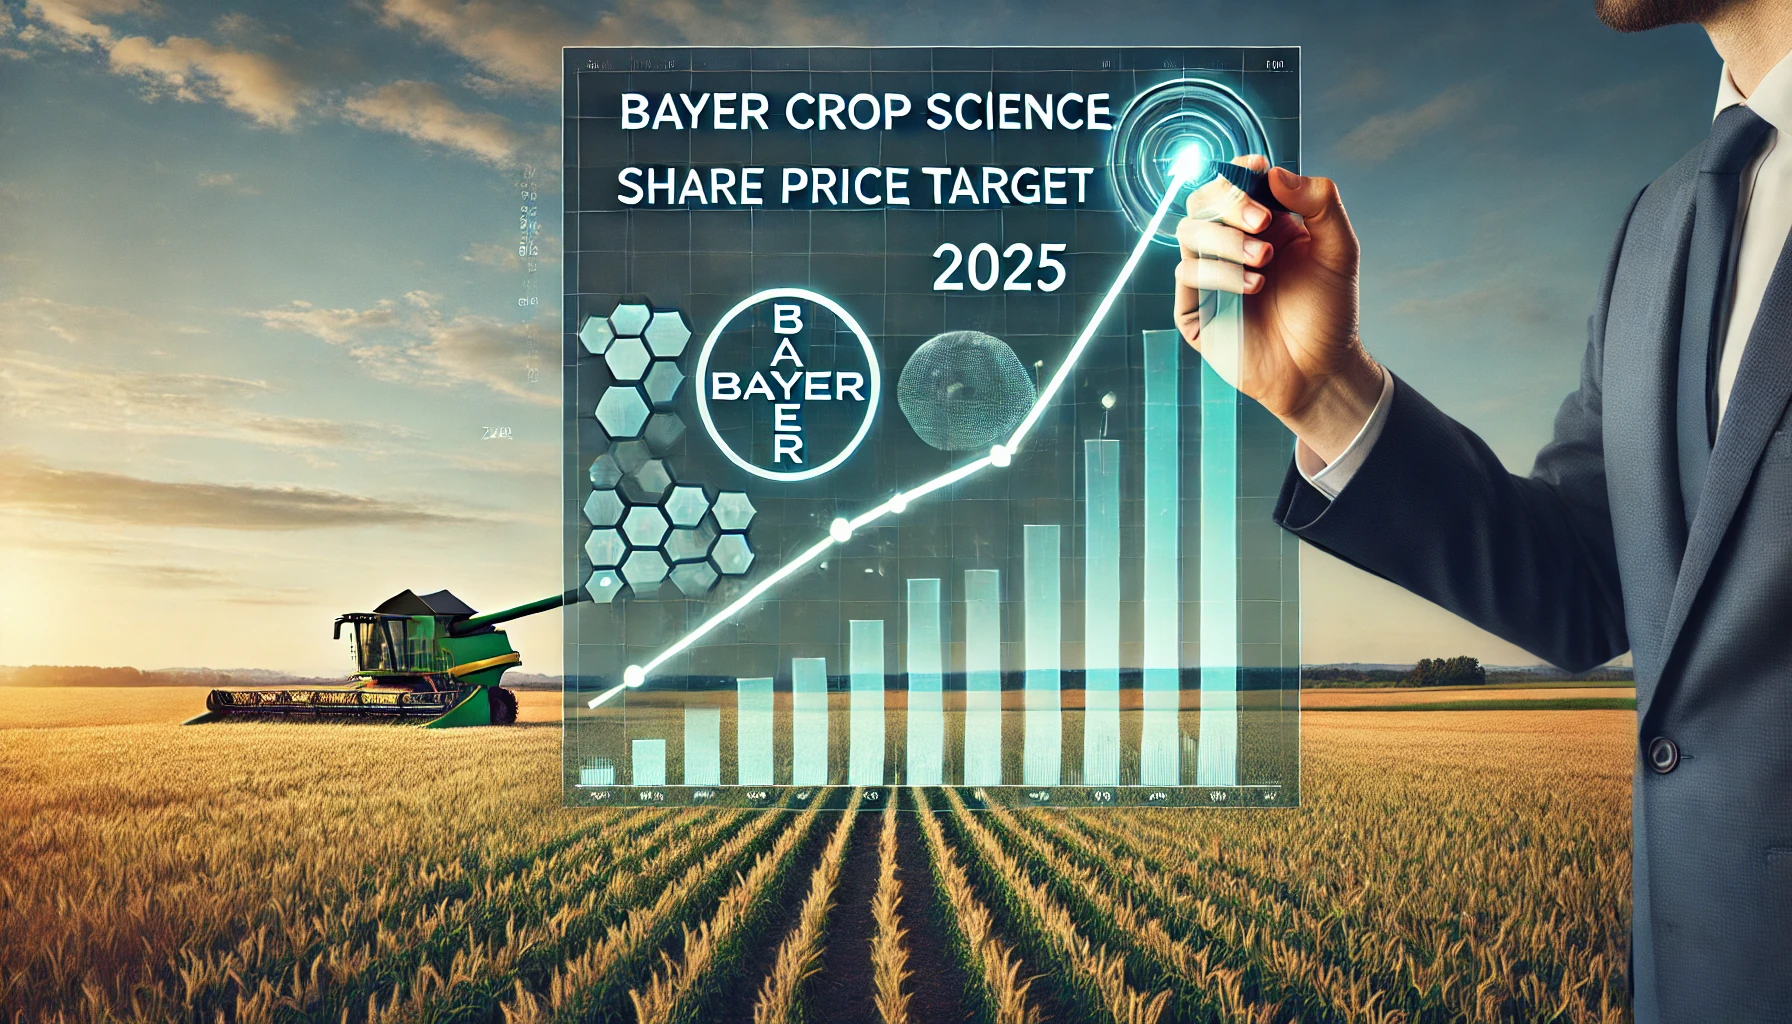 Bayer Crop Science Share Price Target 2025